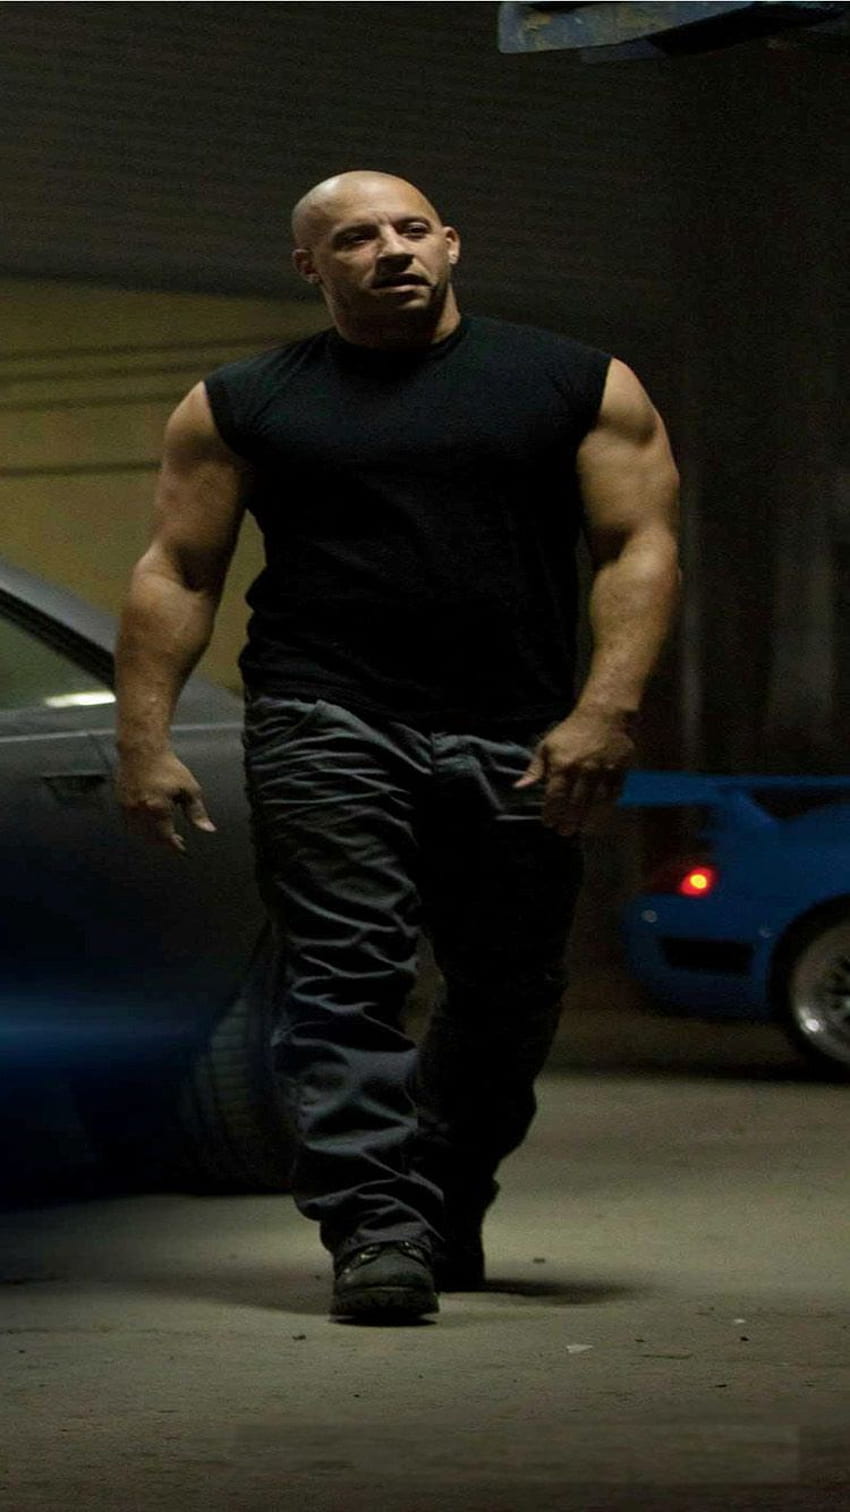 Wallpaper ID 344330  Movie Fast and Furious 9 Phone Wallpaper Dominic  Toretto Vin Diesel 1170x2532 free download